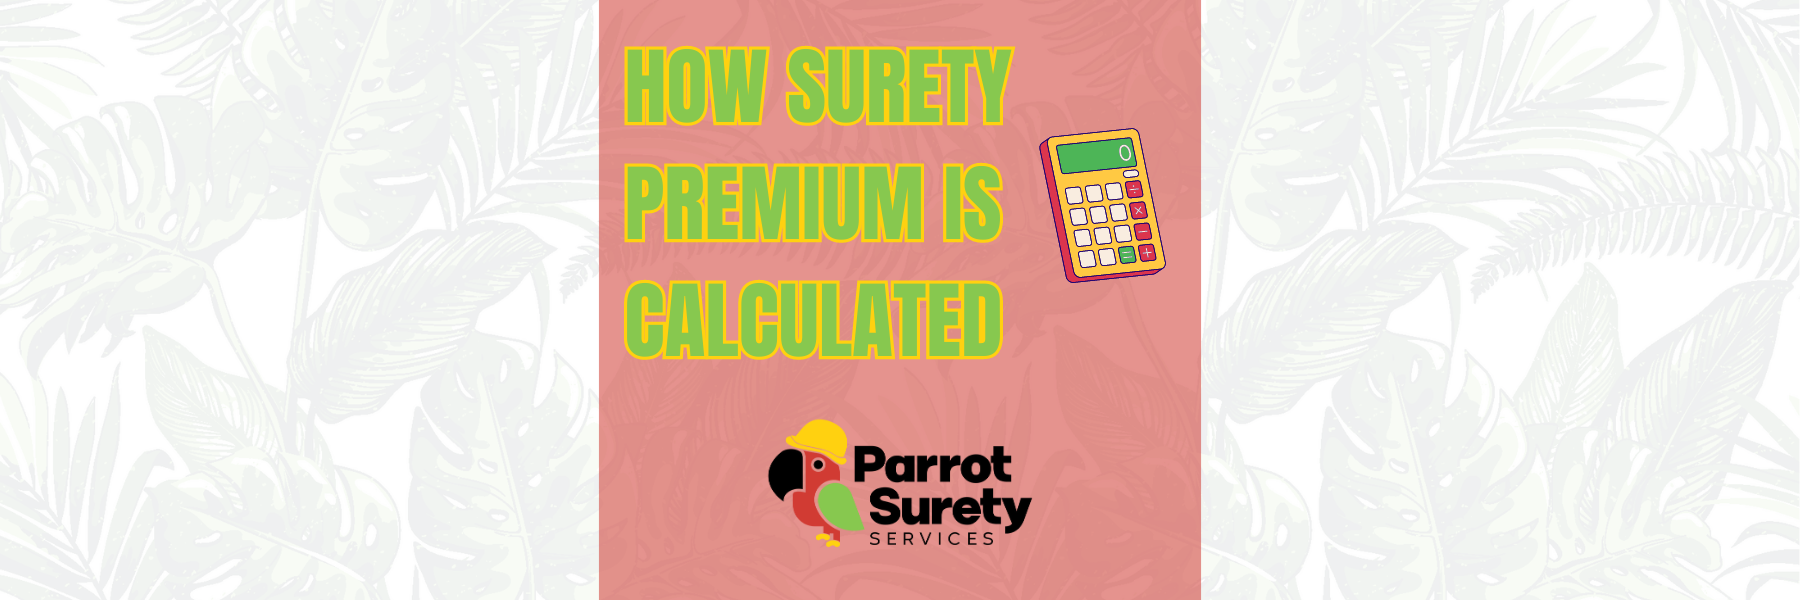 how surety premium is calculated title image for parrot surety services article